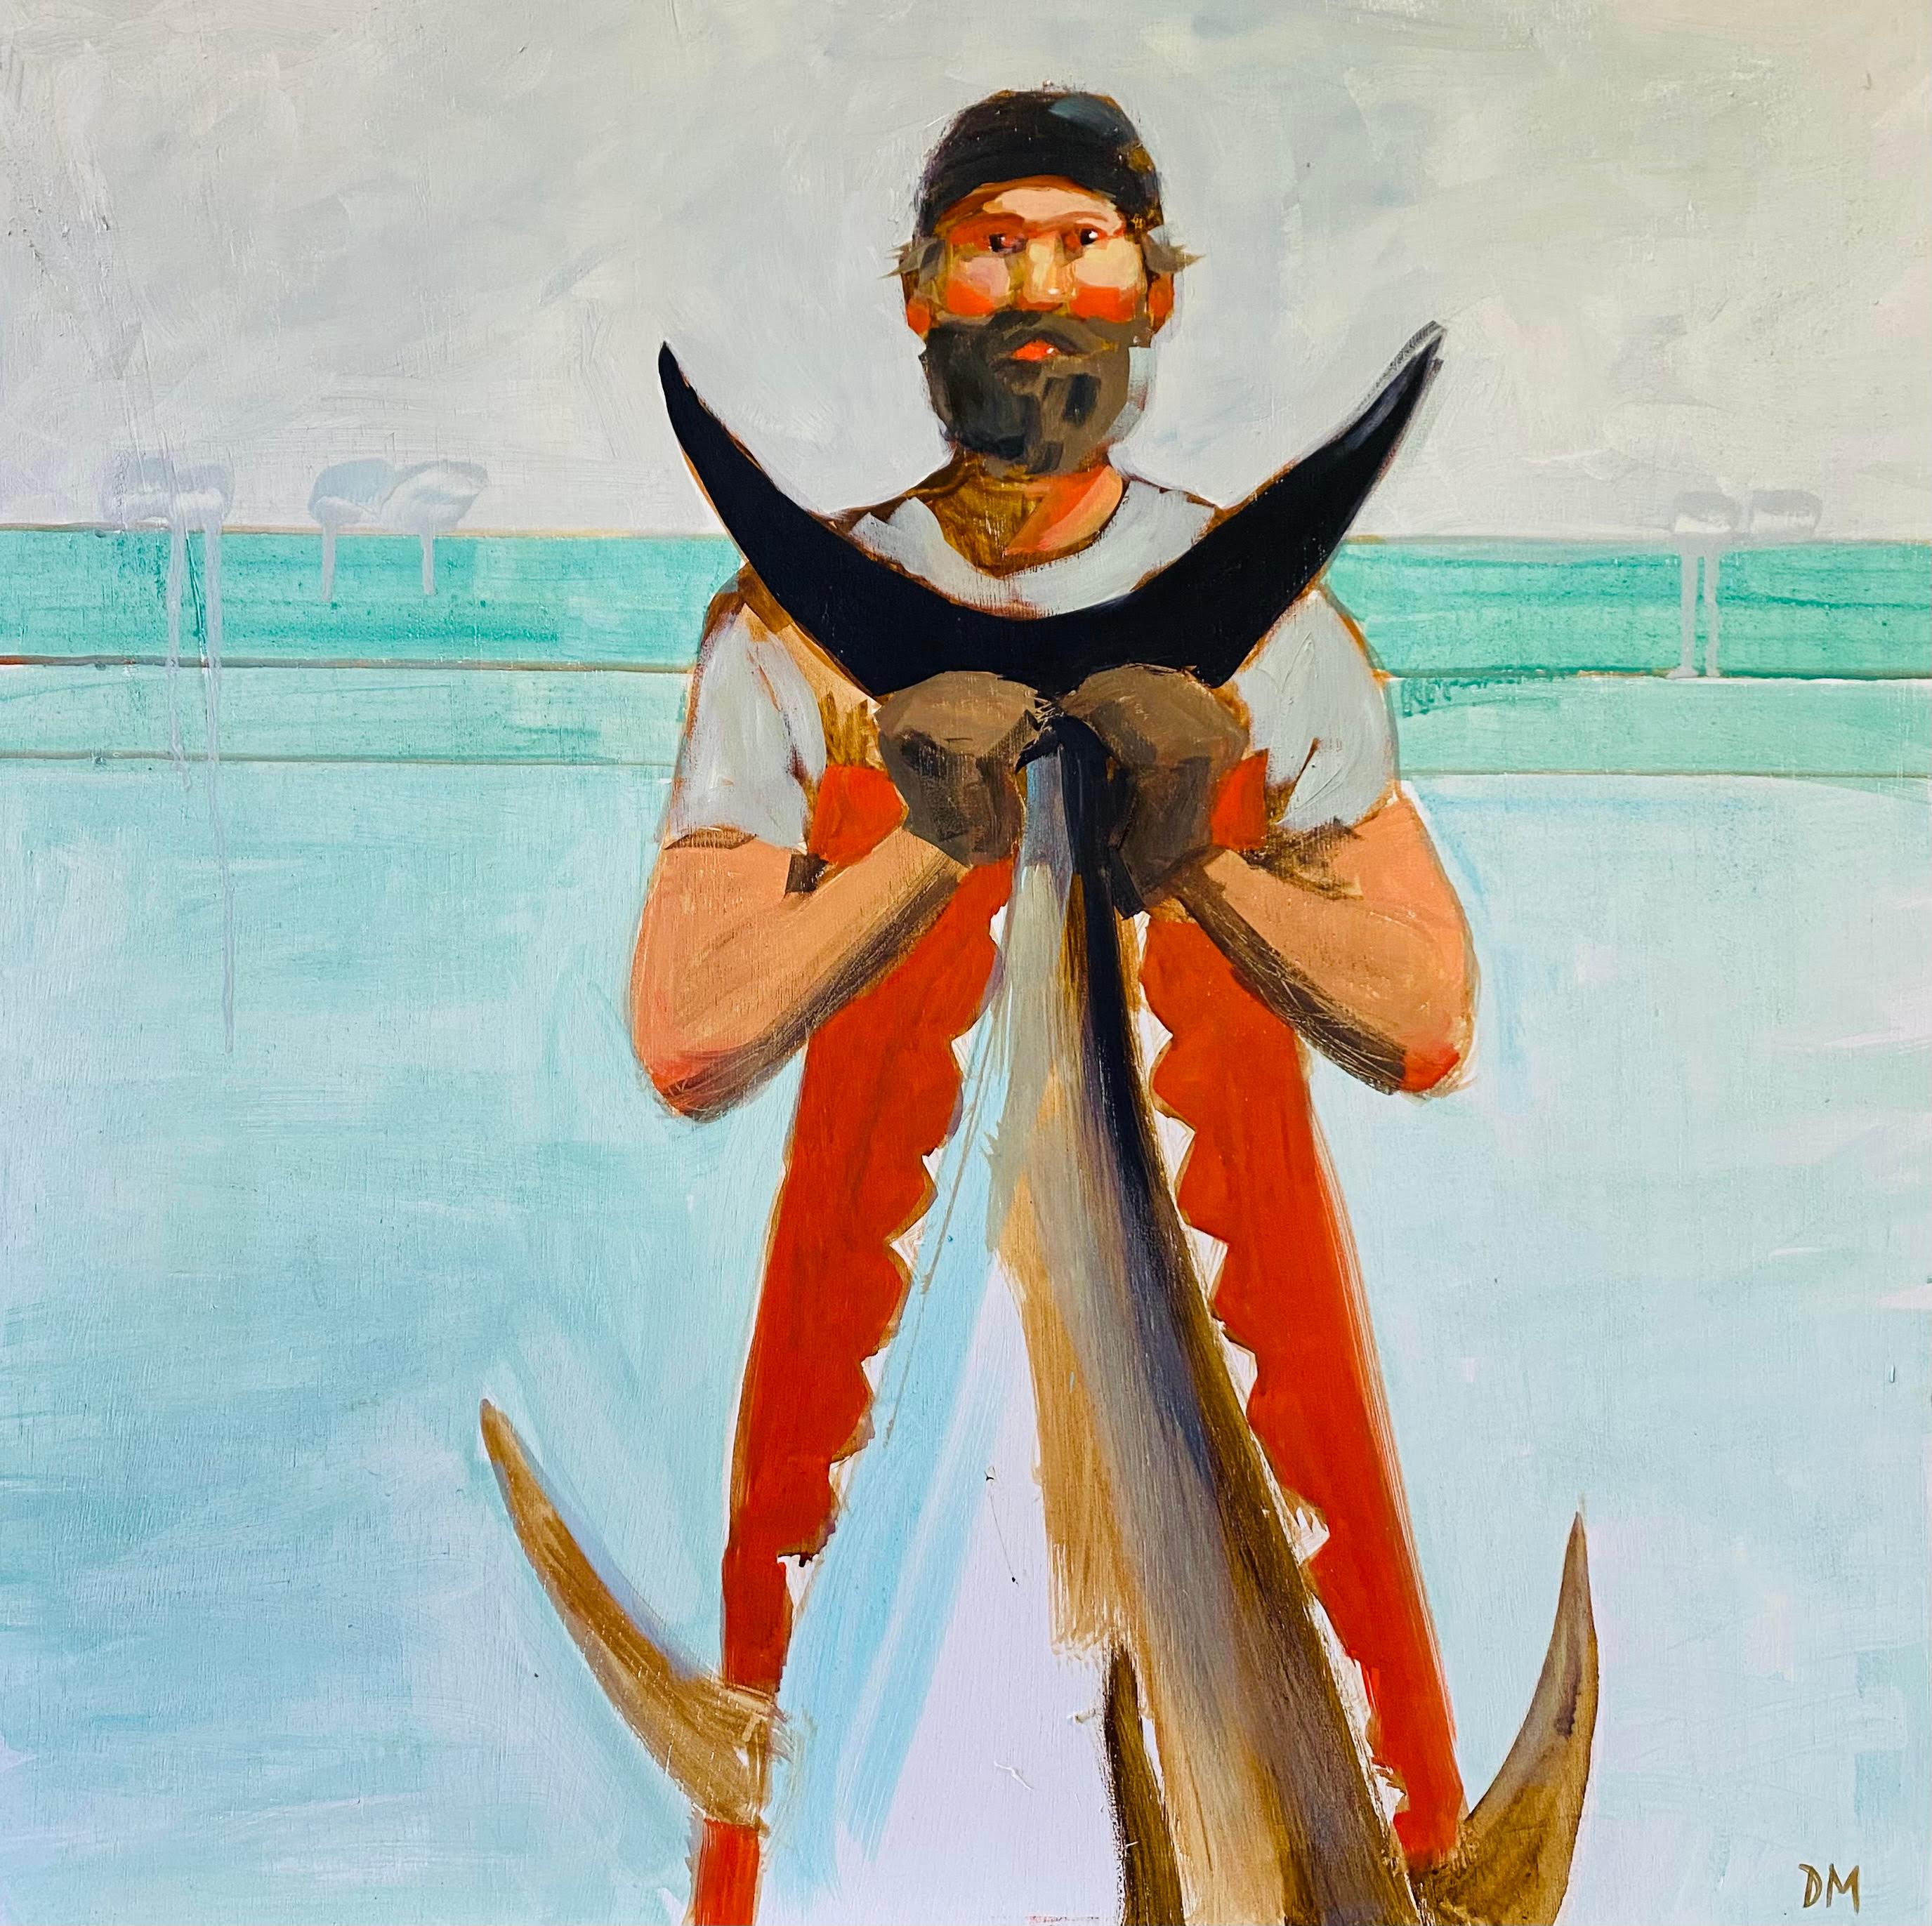 "Fresh" bearded fisherman holding fish - Painting by Debbie Miller